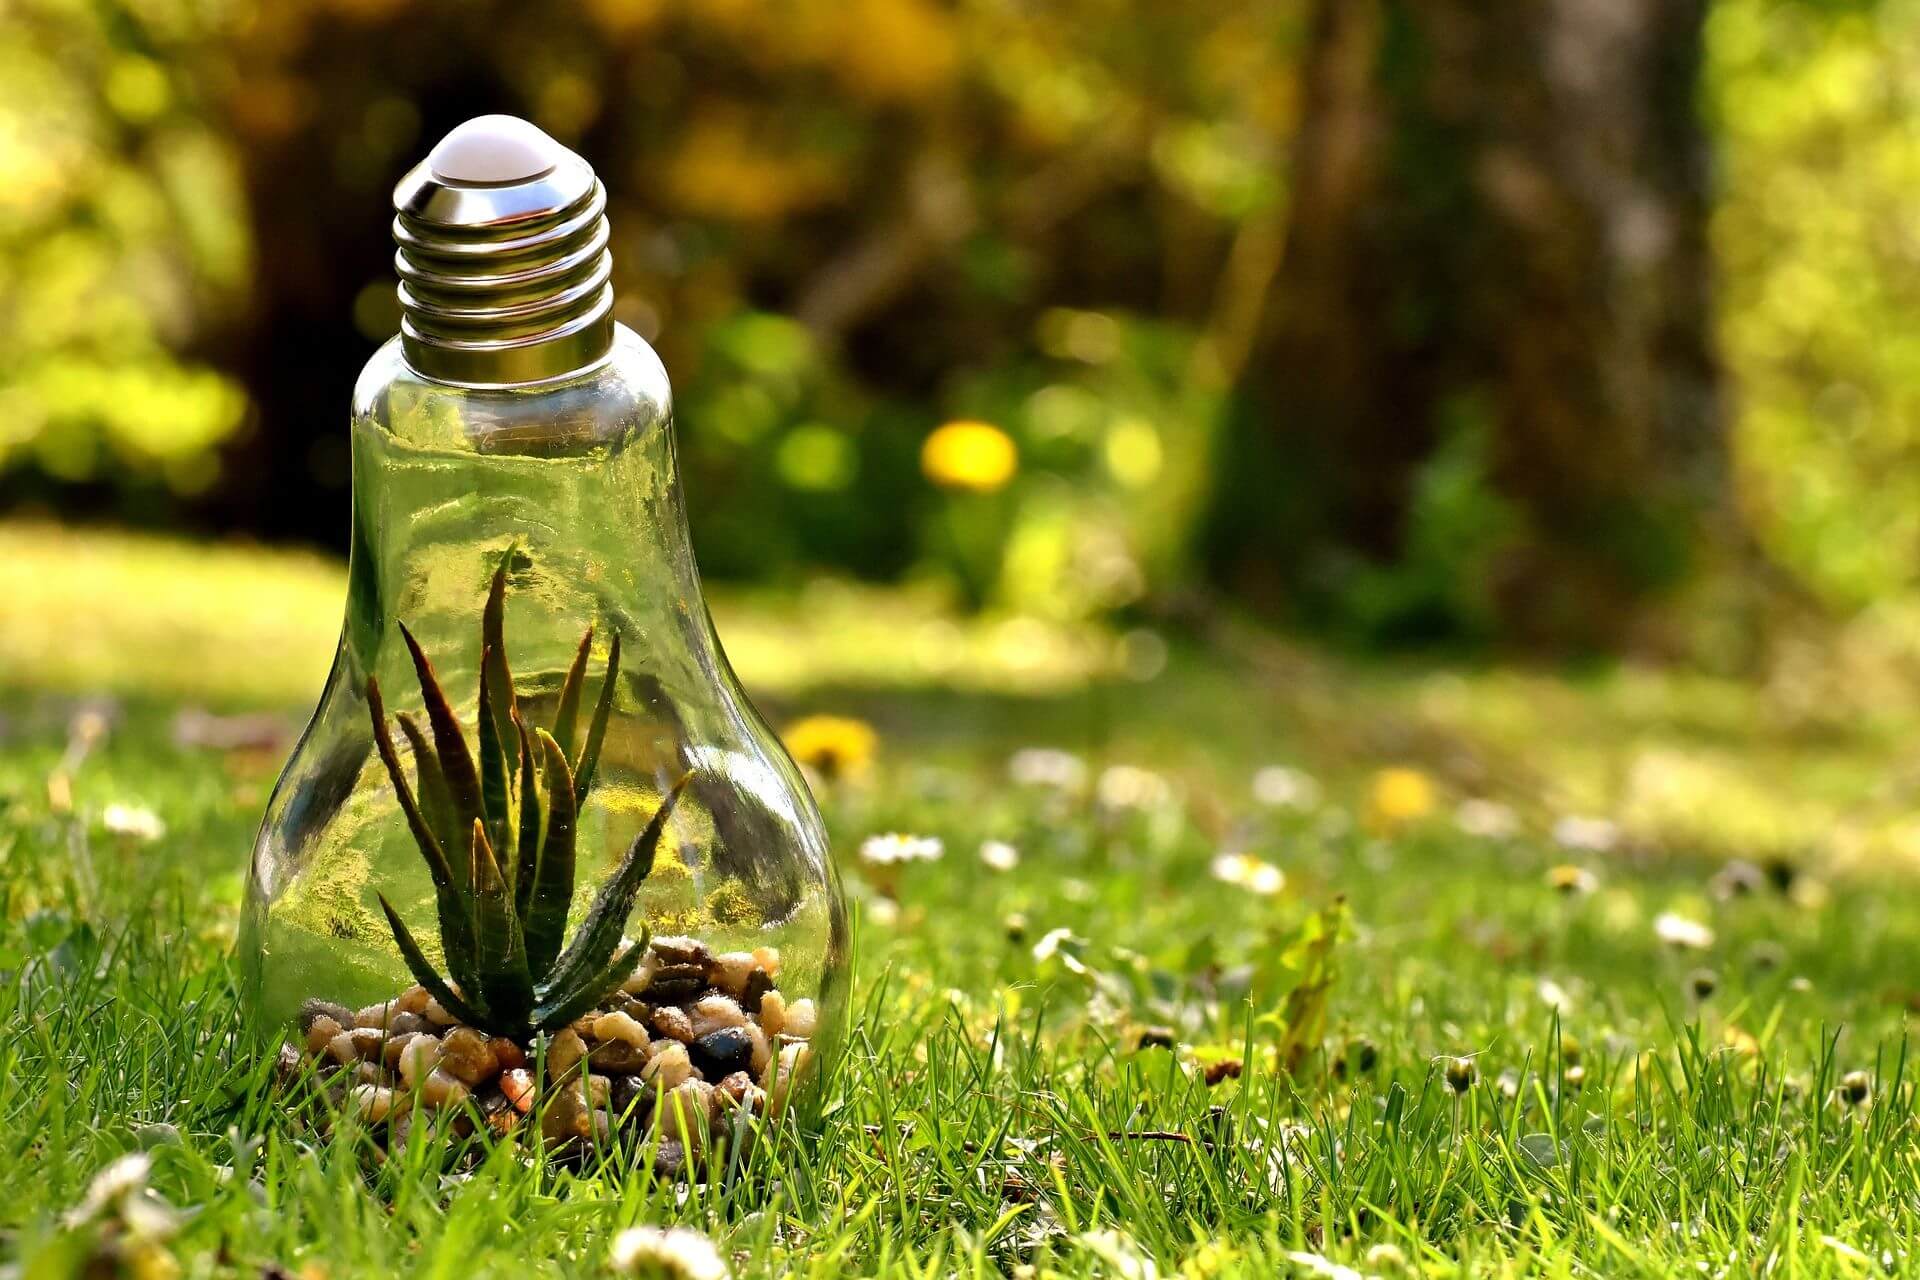 In a bright forest, plants are growing inside a light bulb placed on the ground.